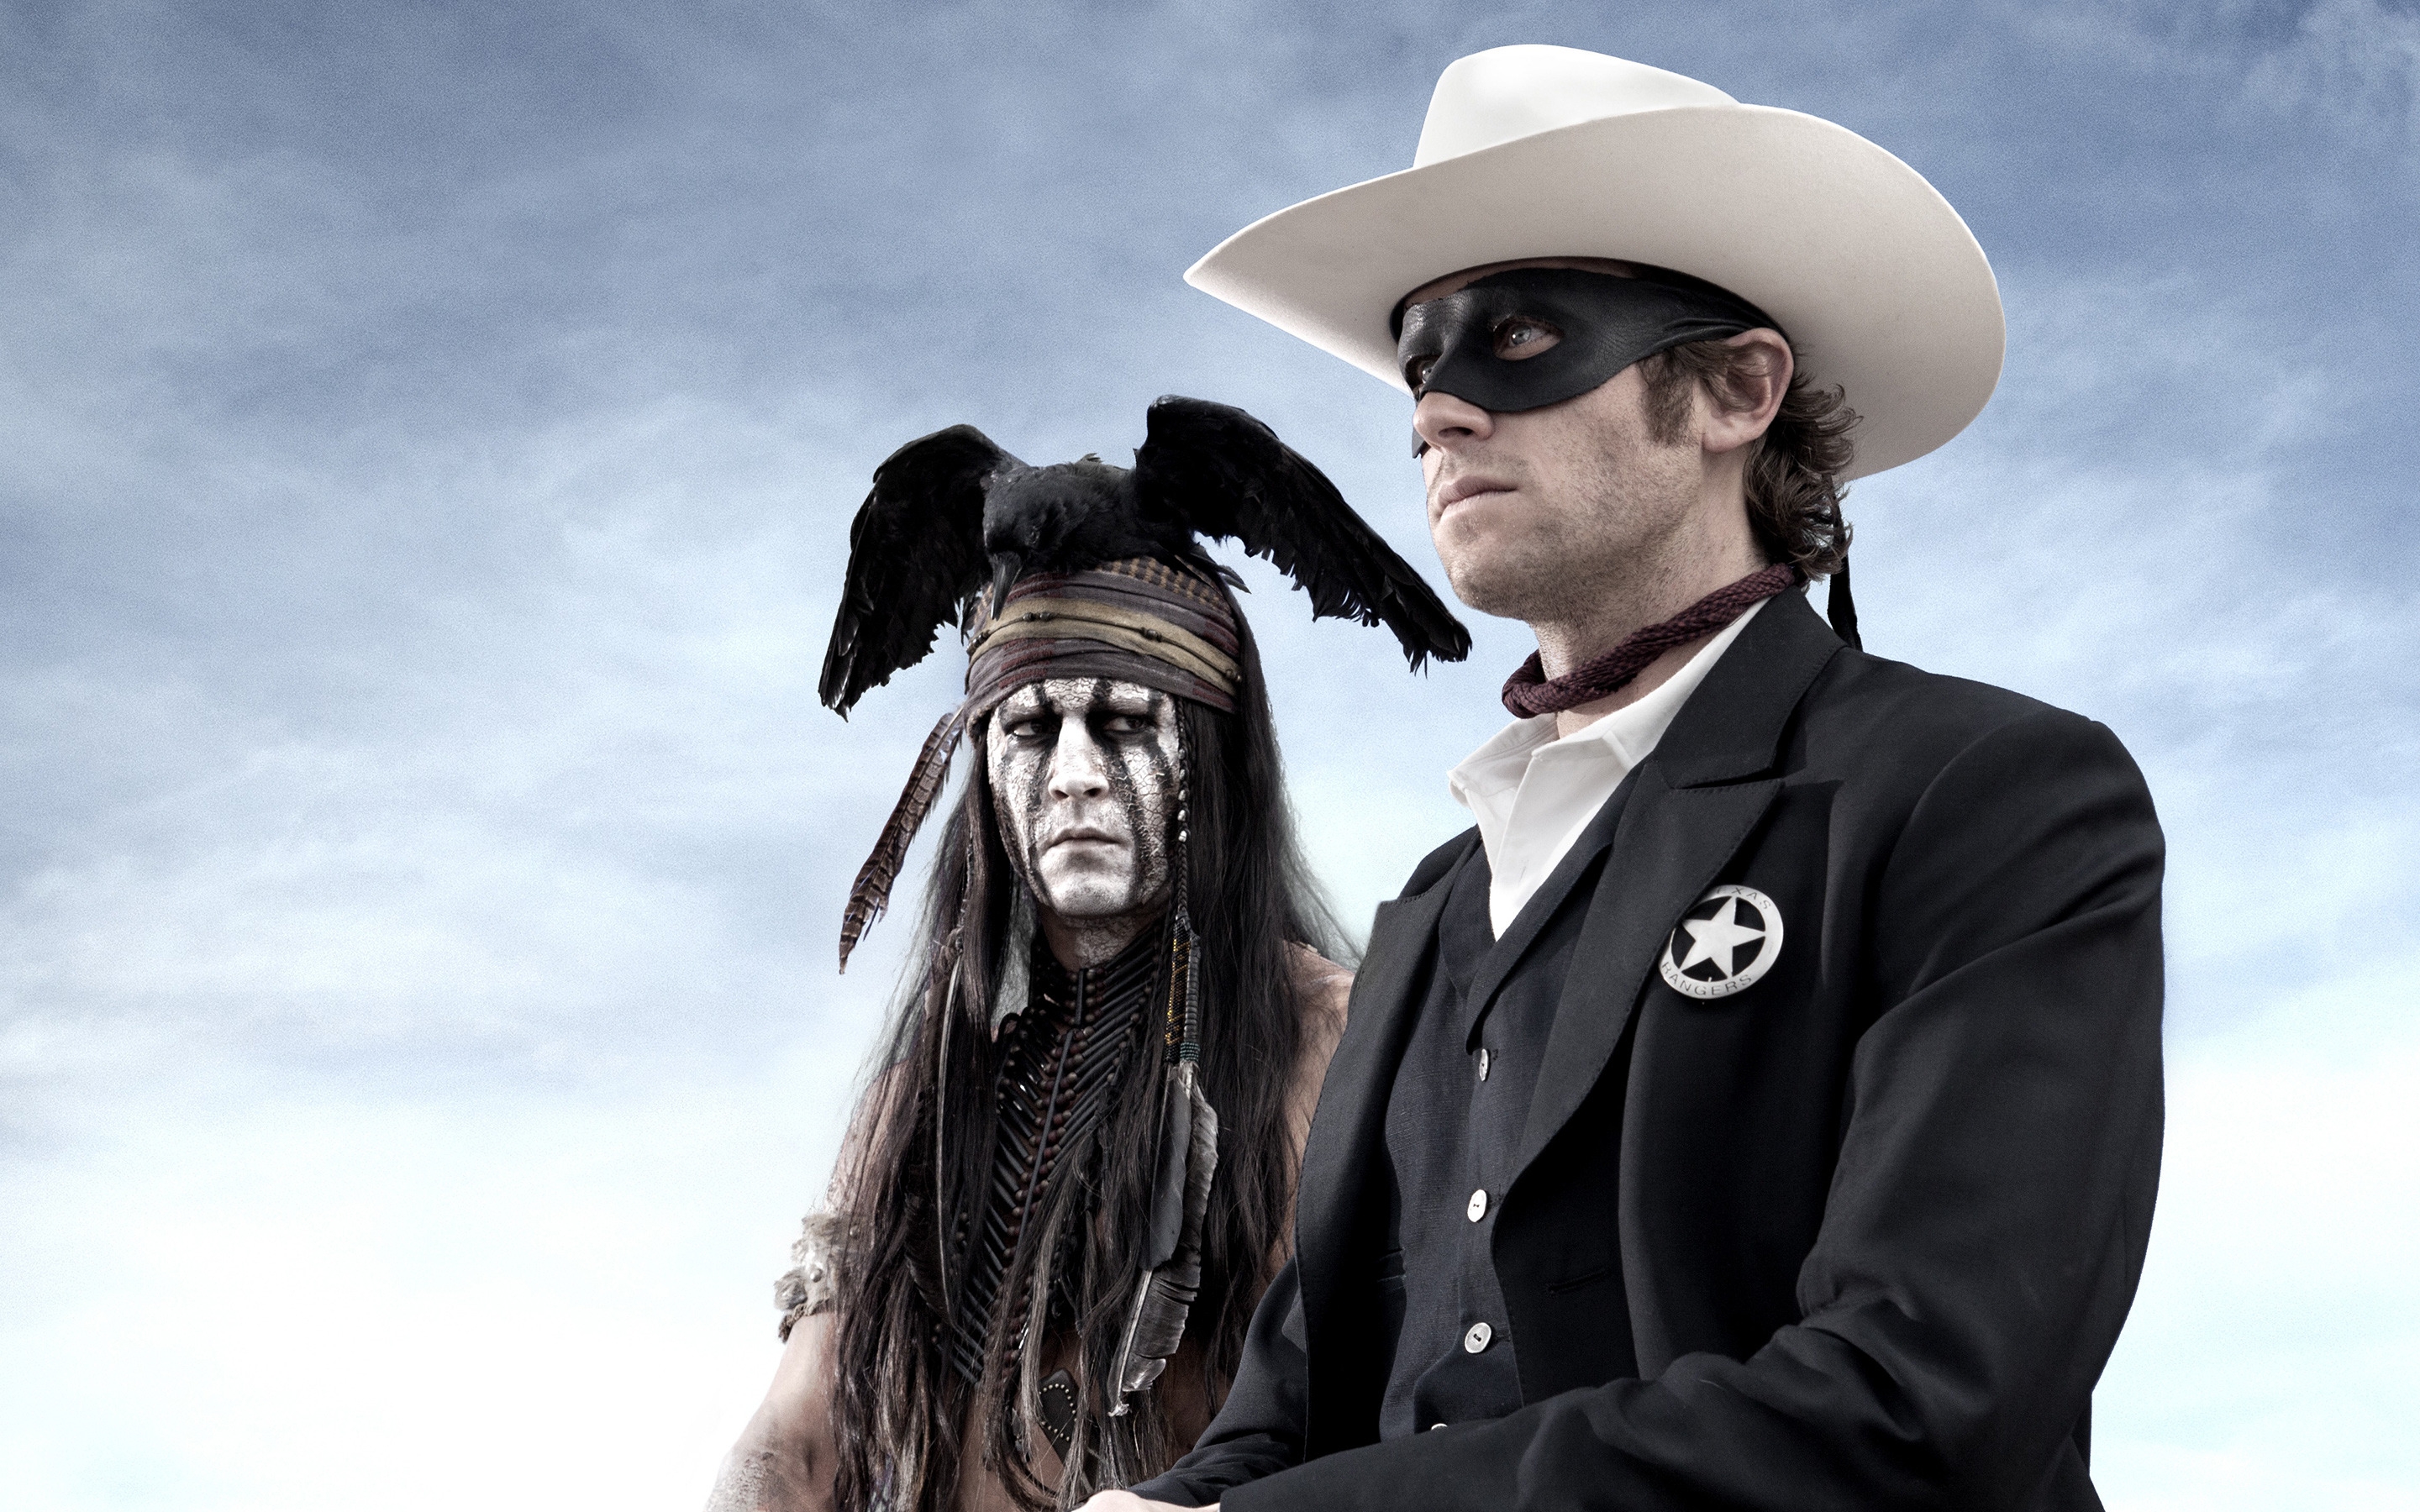 The Lone Ranger 2013 for 2880 x 1800 Retina Display resolution